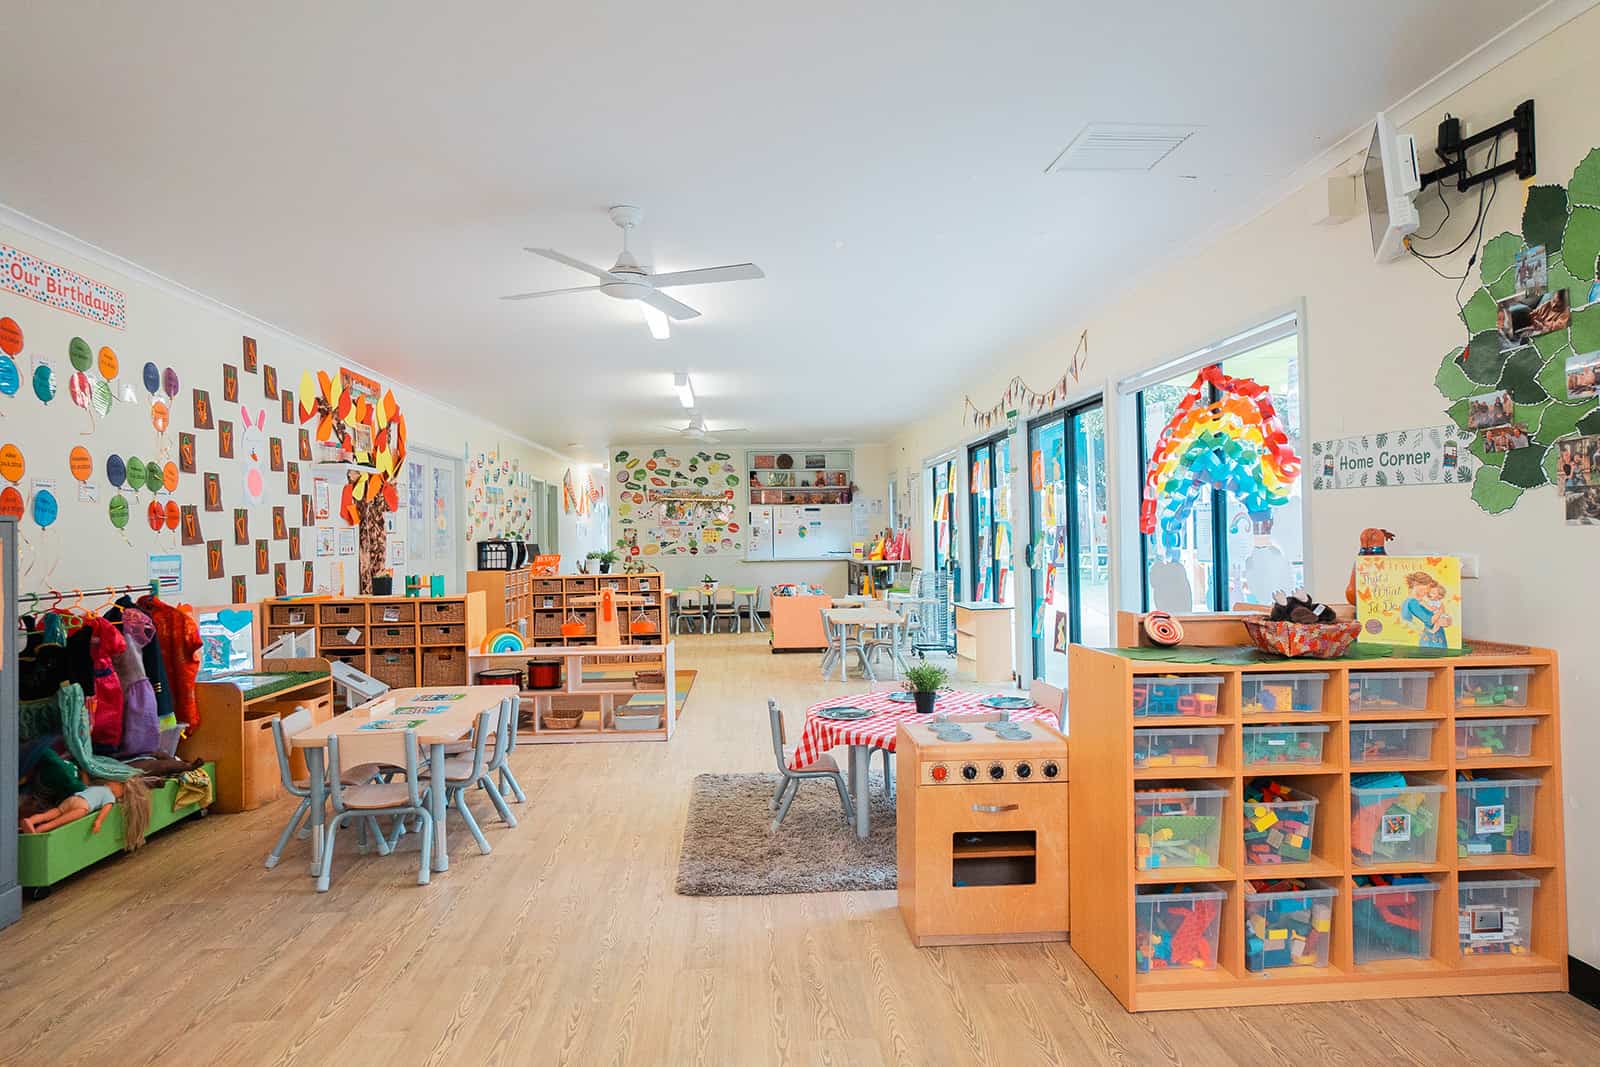 Classroom in a preschool setting with engaging educational materials.